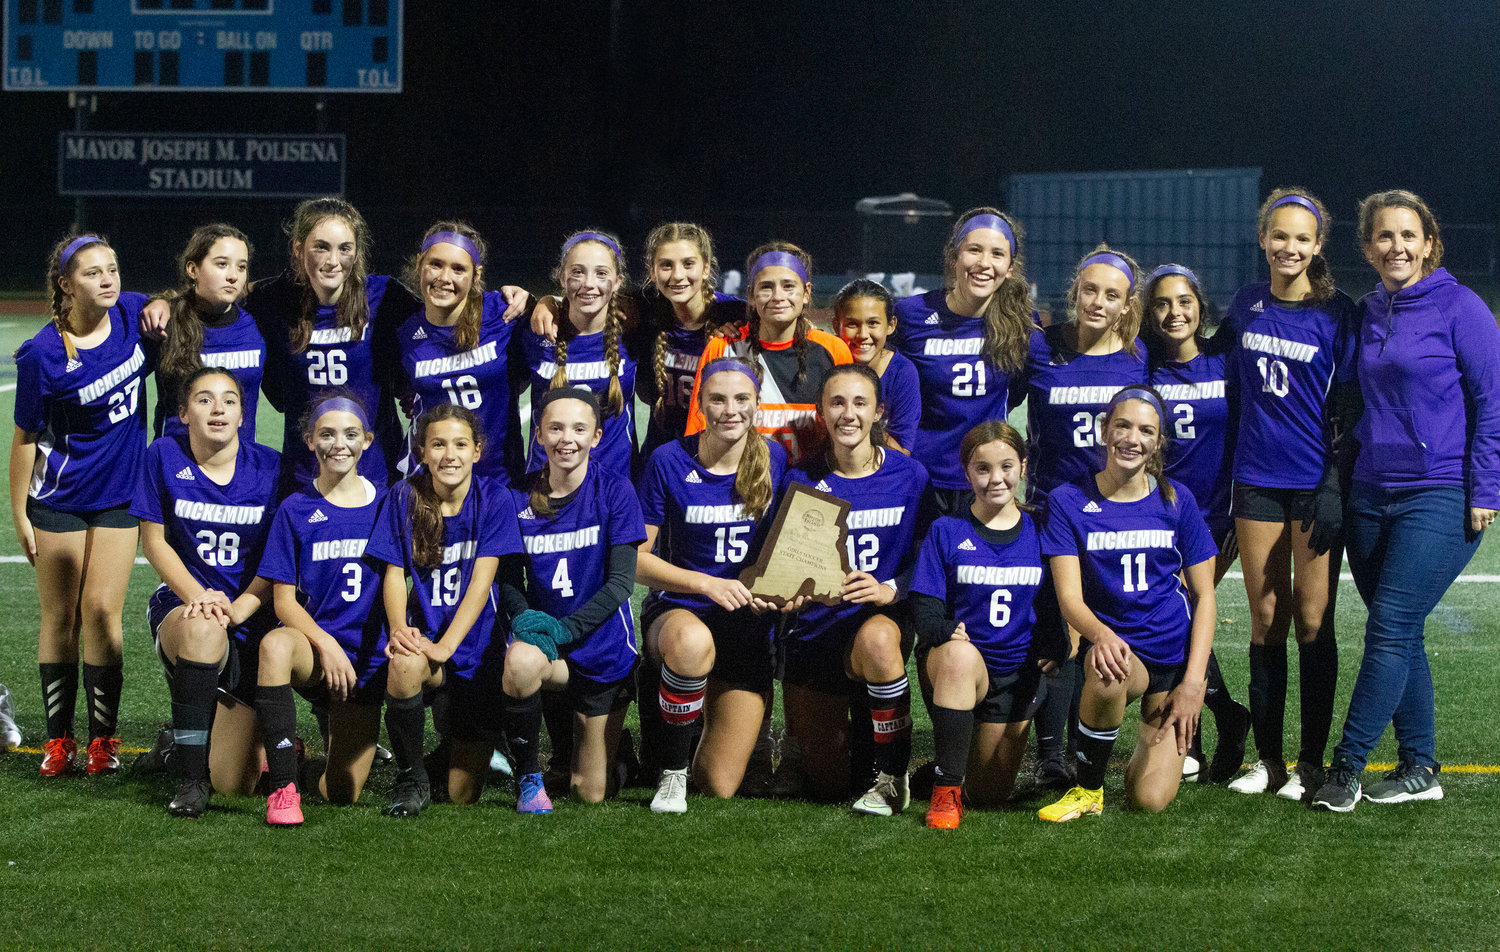 The Kickemuit Middle School girls soccer team poses for family and friends in the crowd.